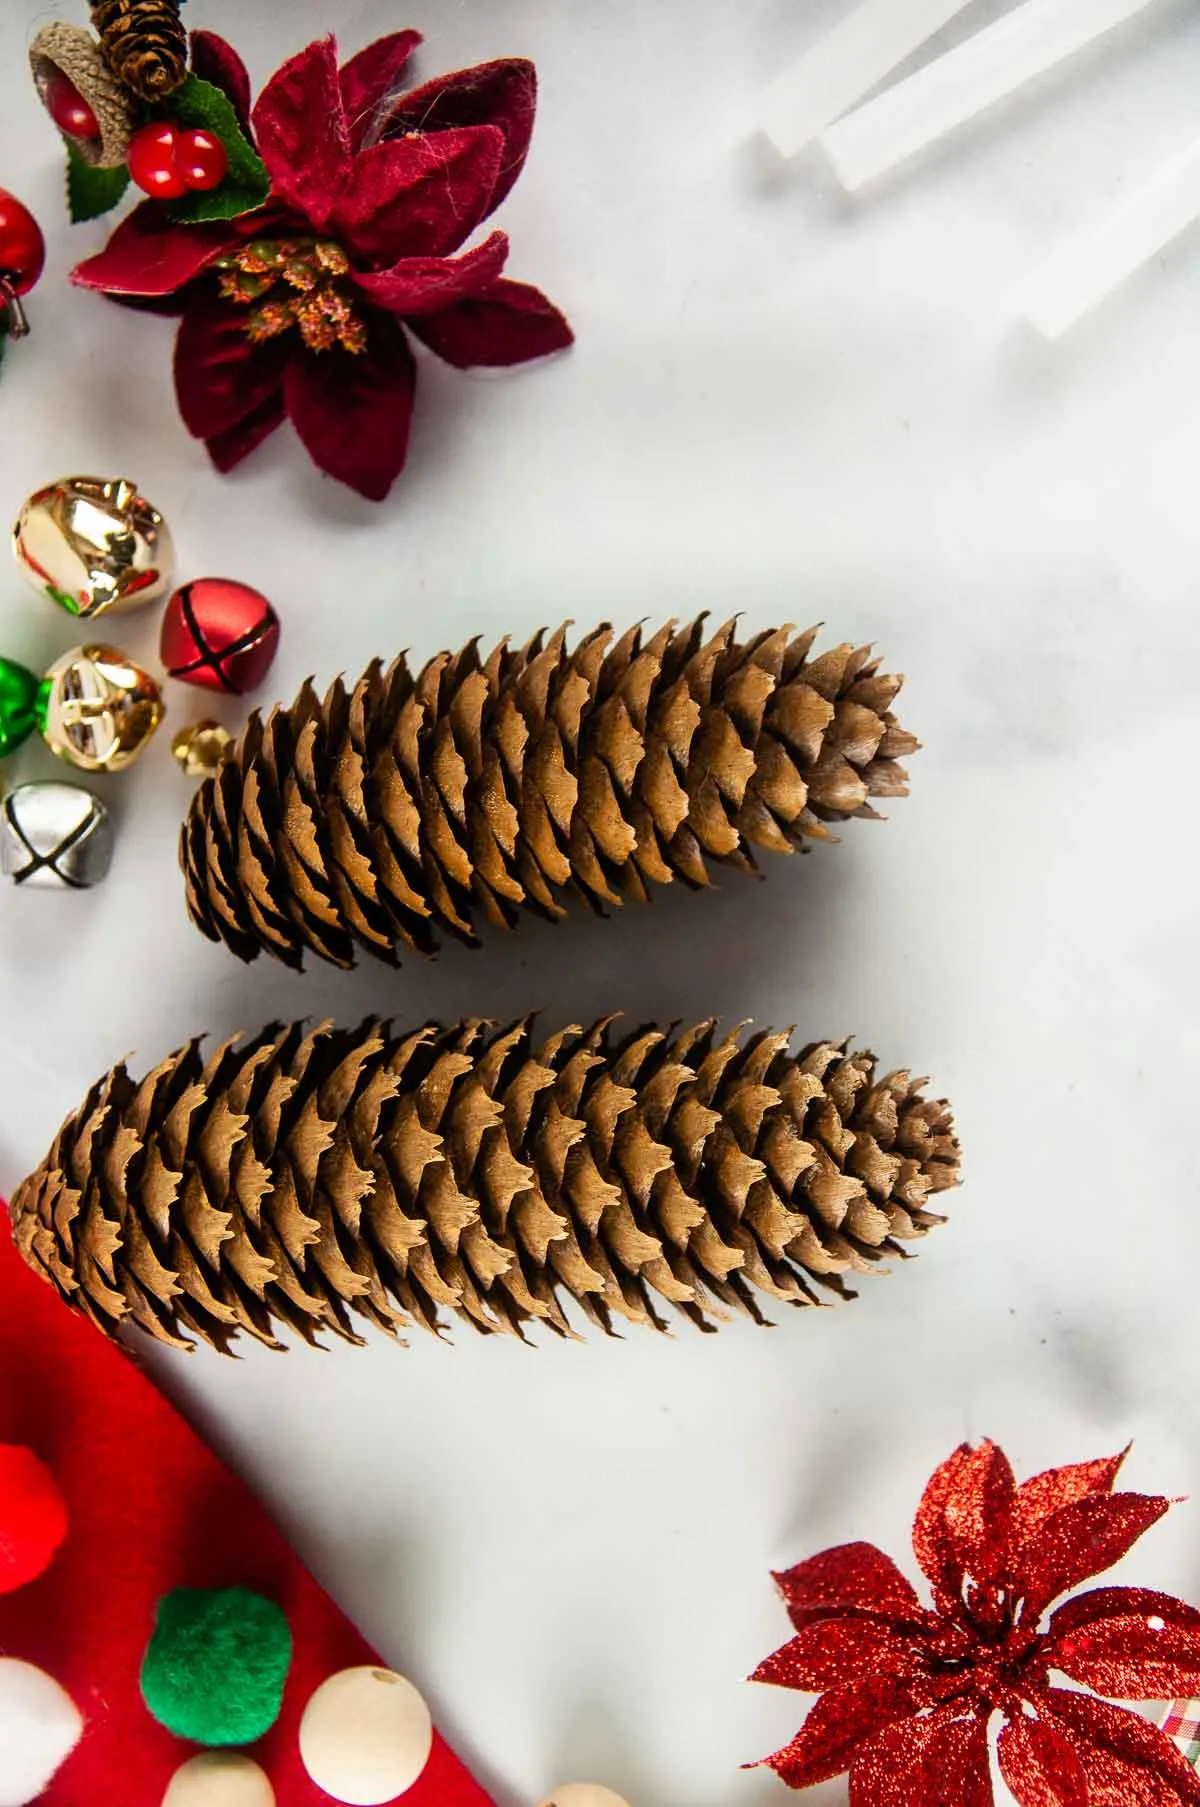 Materials to make a pinecone gnome ornament include long pinecones, white paint, felt, wood beads, hot glue sticks, and other decorations